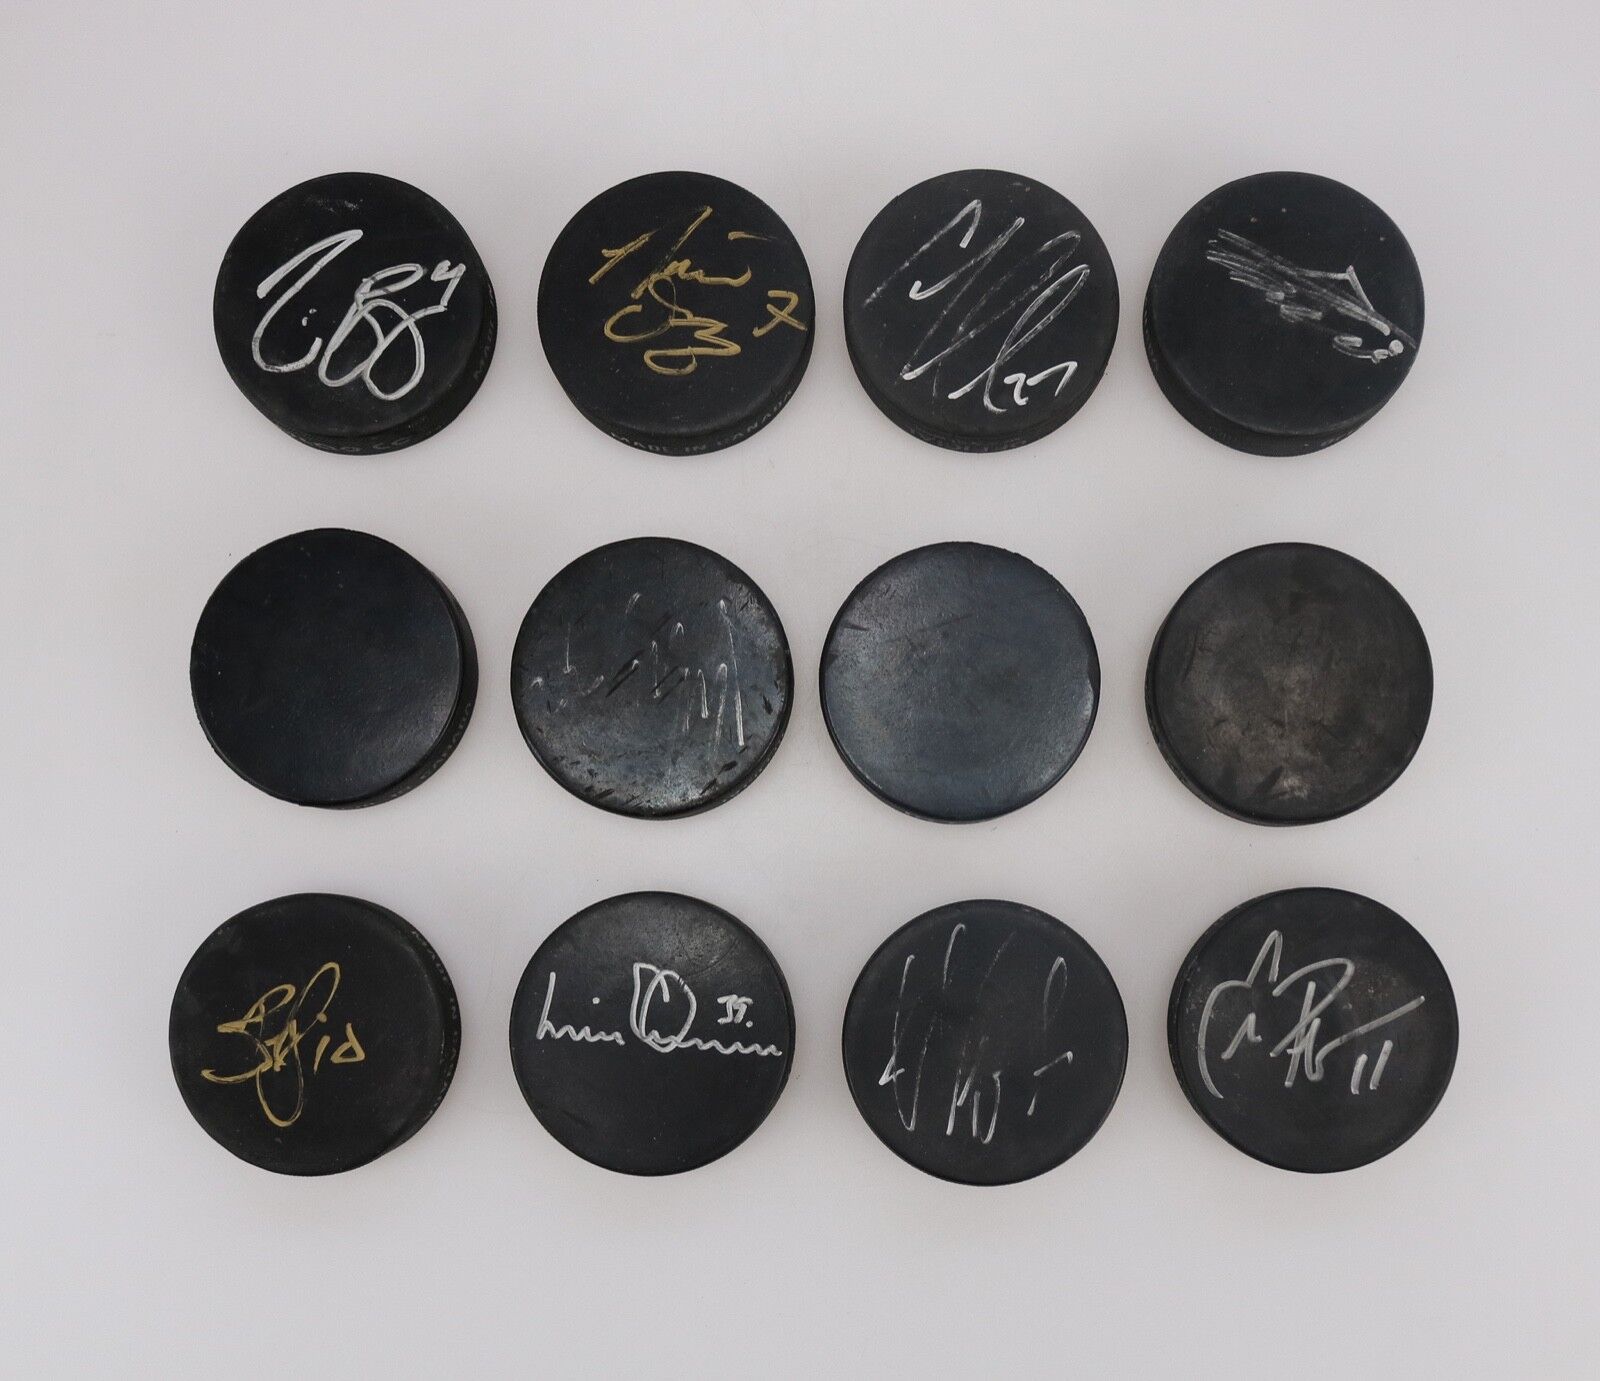  Hockey Official Practice Puck NHL Lot 12 Autograph Made in Canada InGlass Co InGlas Co. - фотография #6